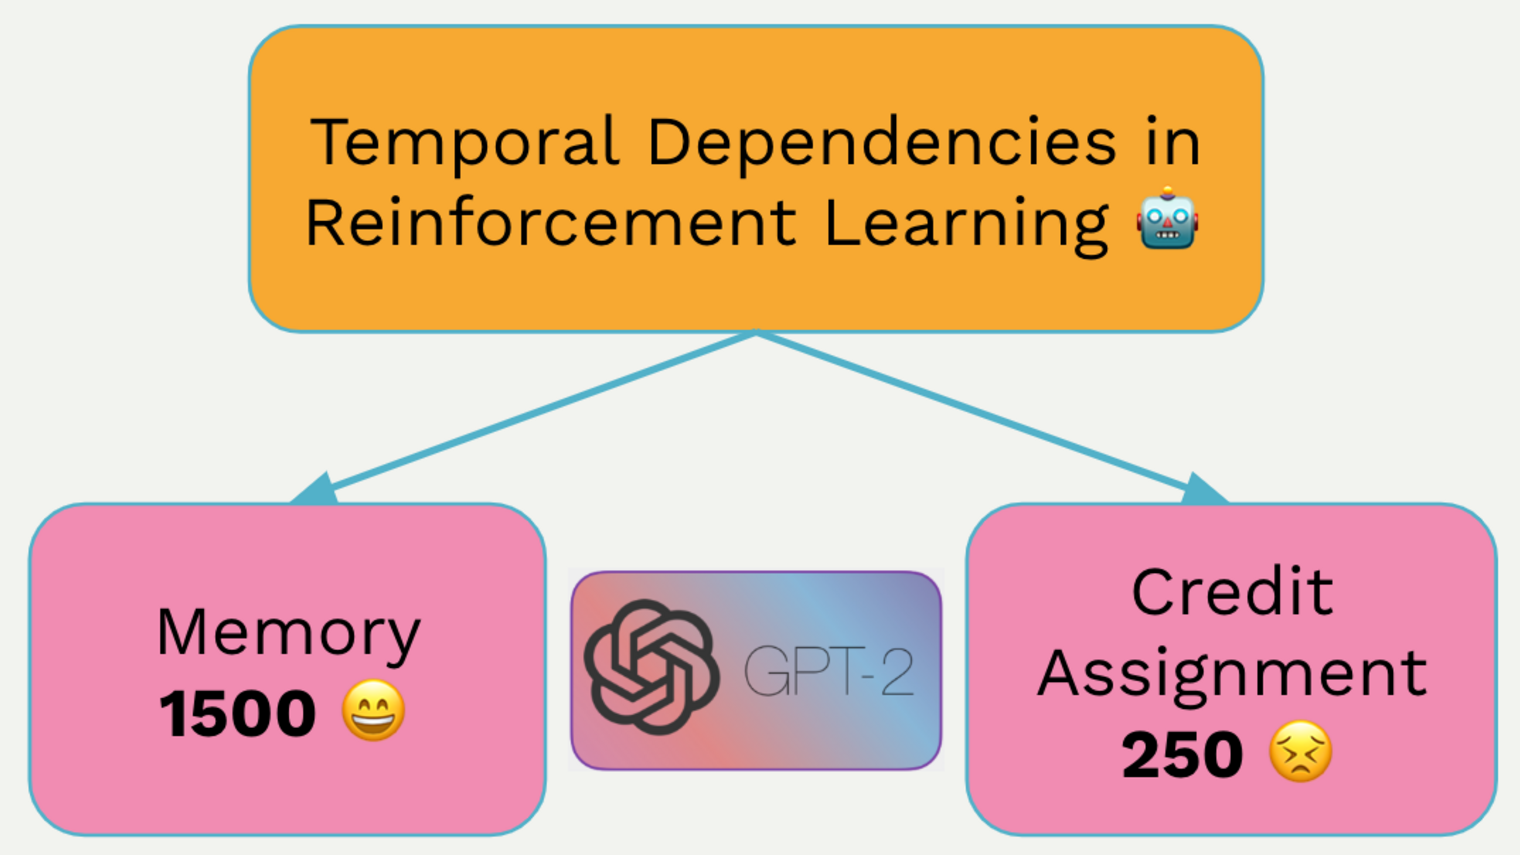 Temporal Dependencies in Reinforcement Learning